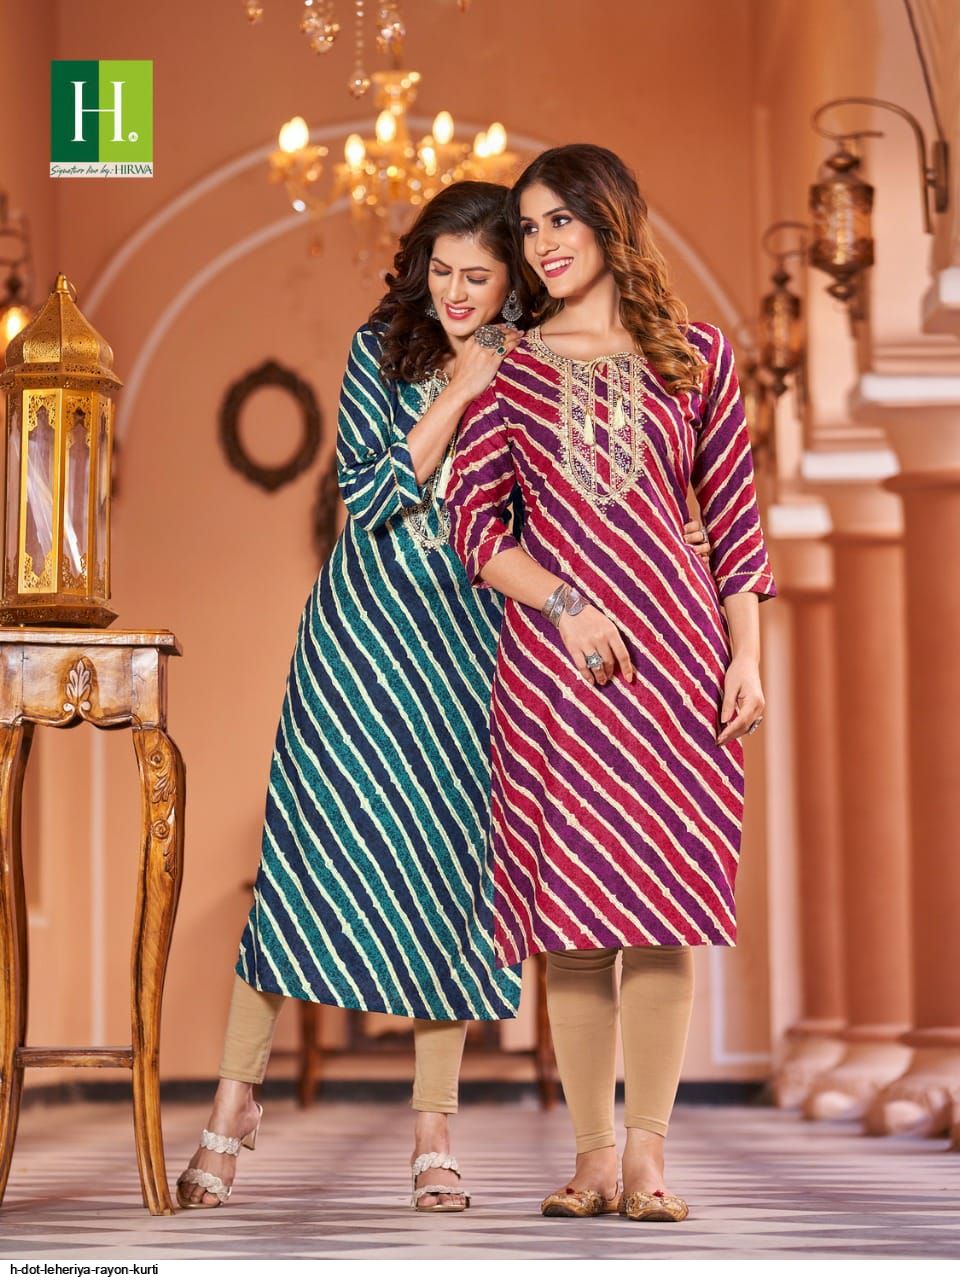 I wish to open a kurtis business where can I buy wholesale kurtis in India   Garments business Wholesale clothing websites Kurti